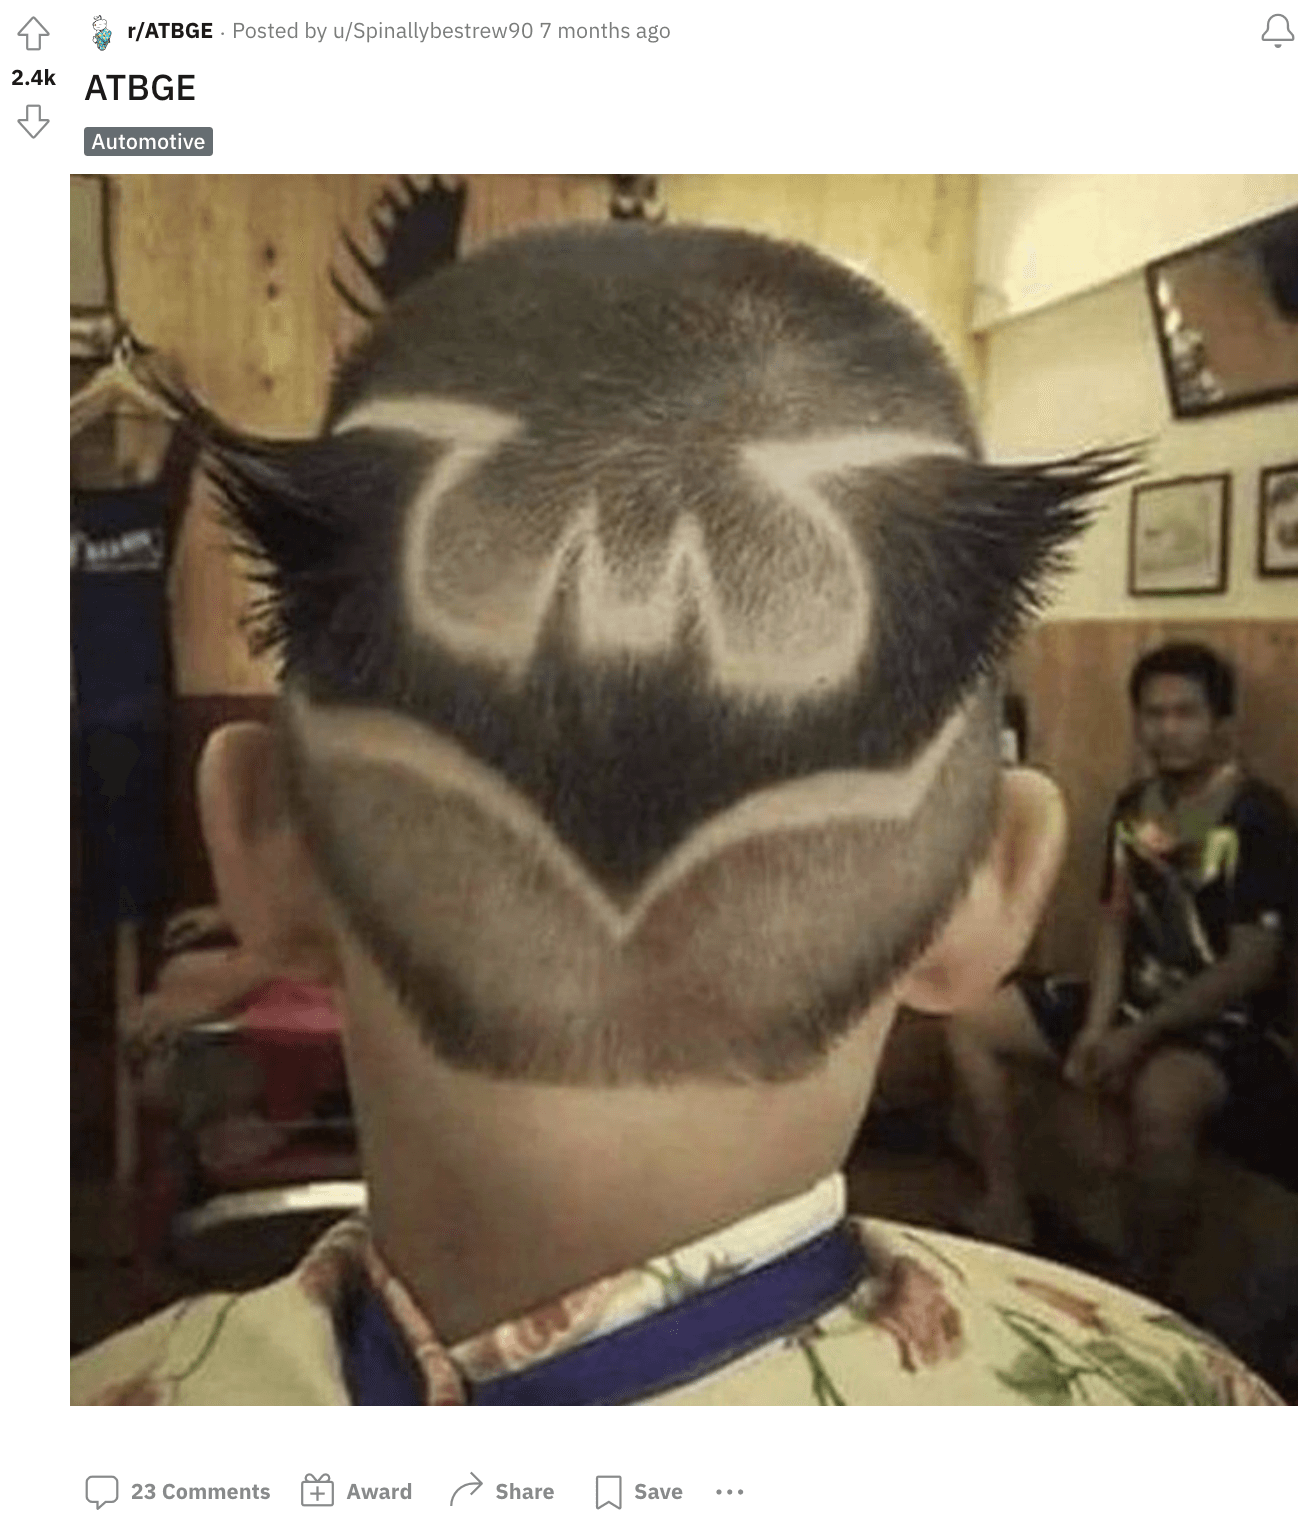 An example ATBGE post